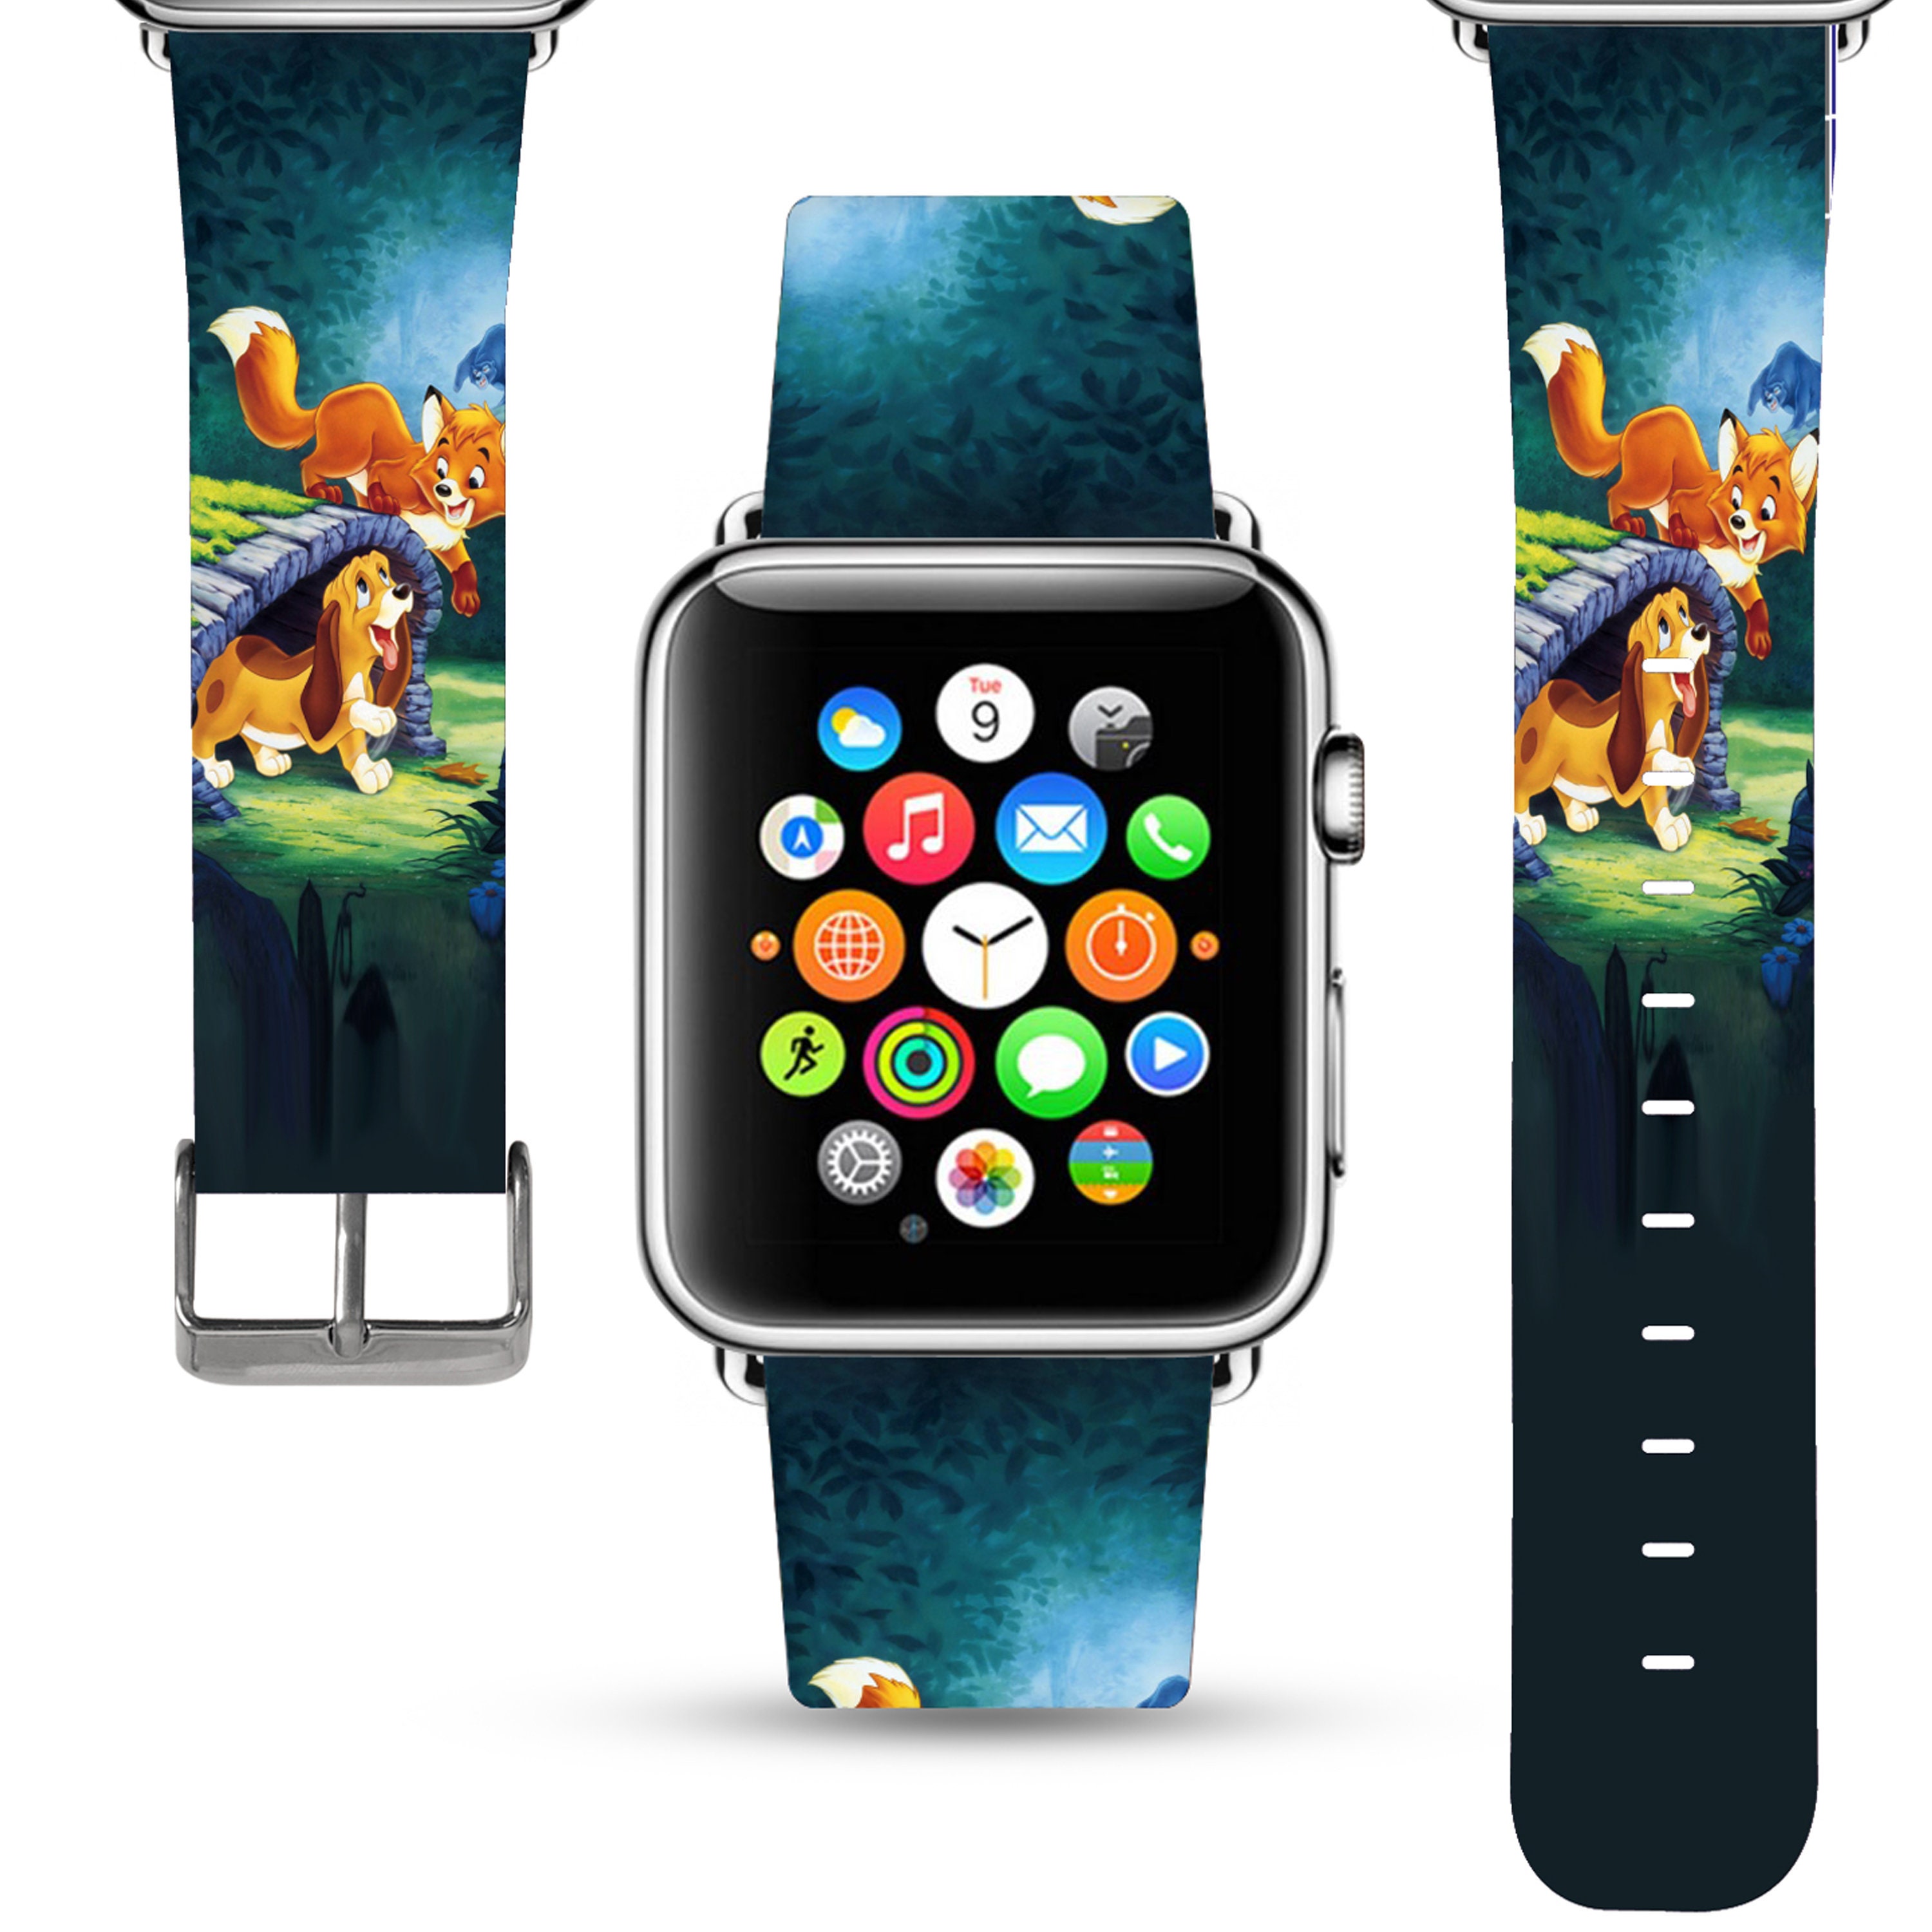 44 Hound Mm 40 42 All Strap, PU 41 Etsy - 38 and 49 the Mm Watch and Kd-aodo Fox Leather Band the Apple 45 Series, Watch Disney Inspired for